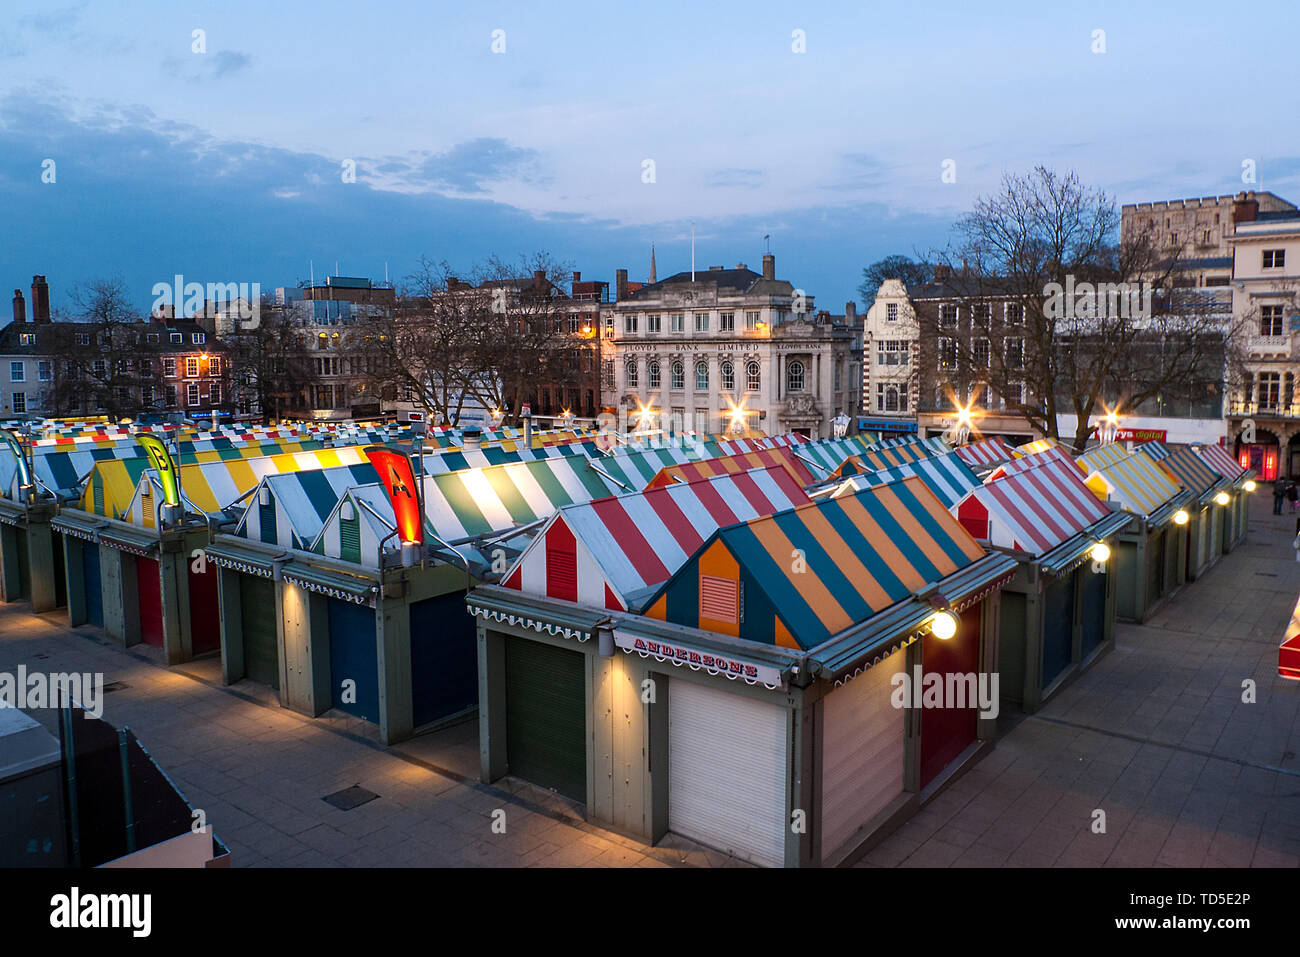 Looking out over the market towards the famous castle at dusk, Norwich, Norfolk, England, United Kingdom, Europe Stock Photo